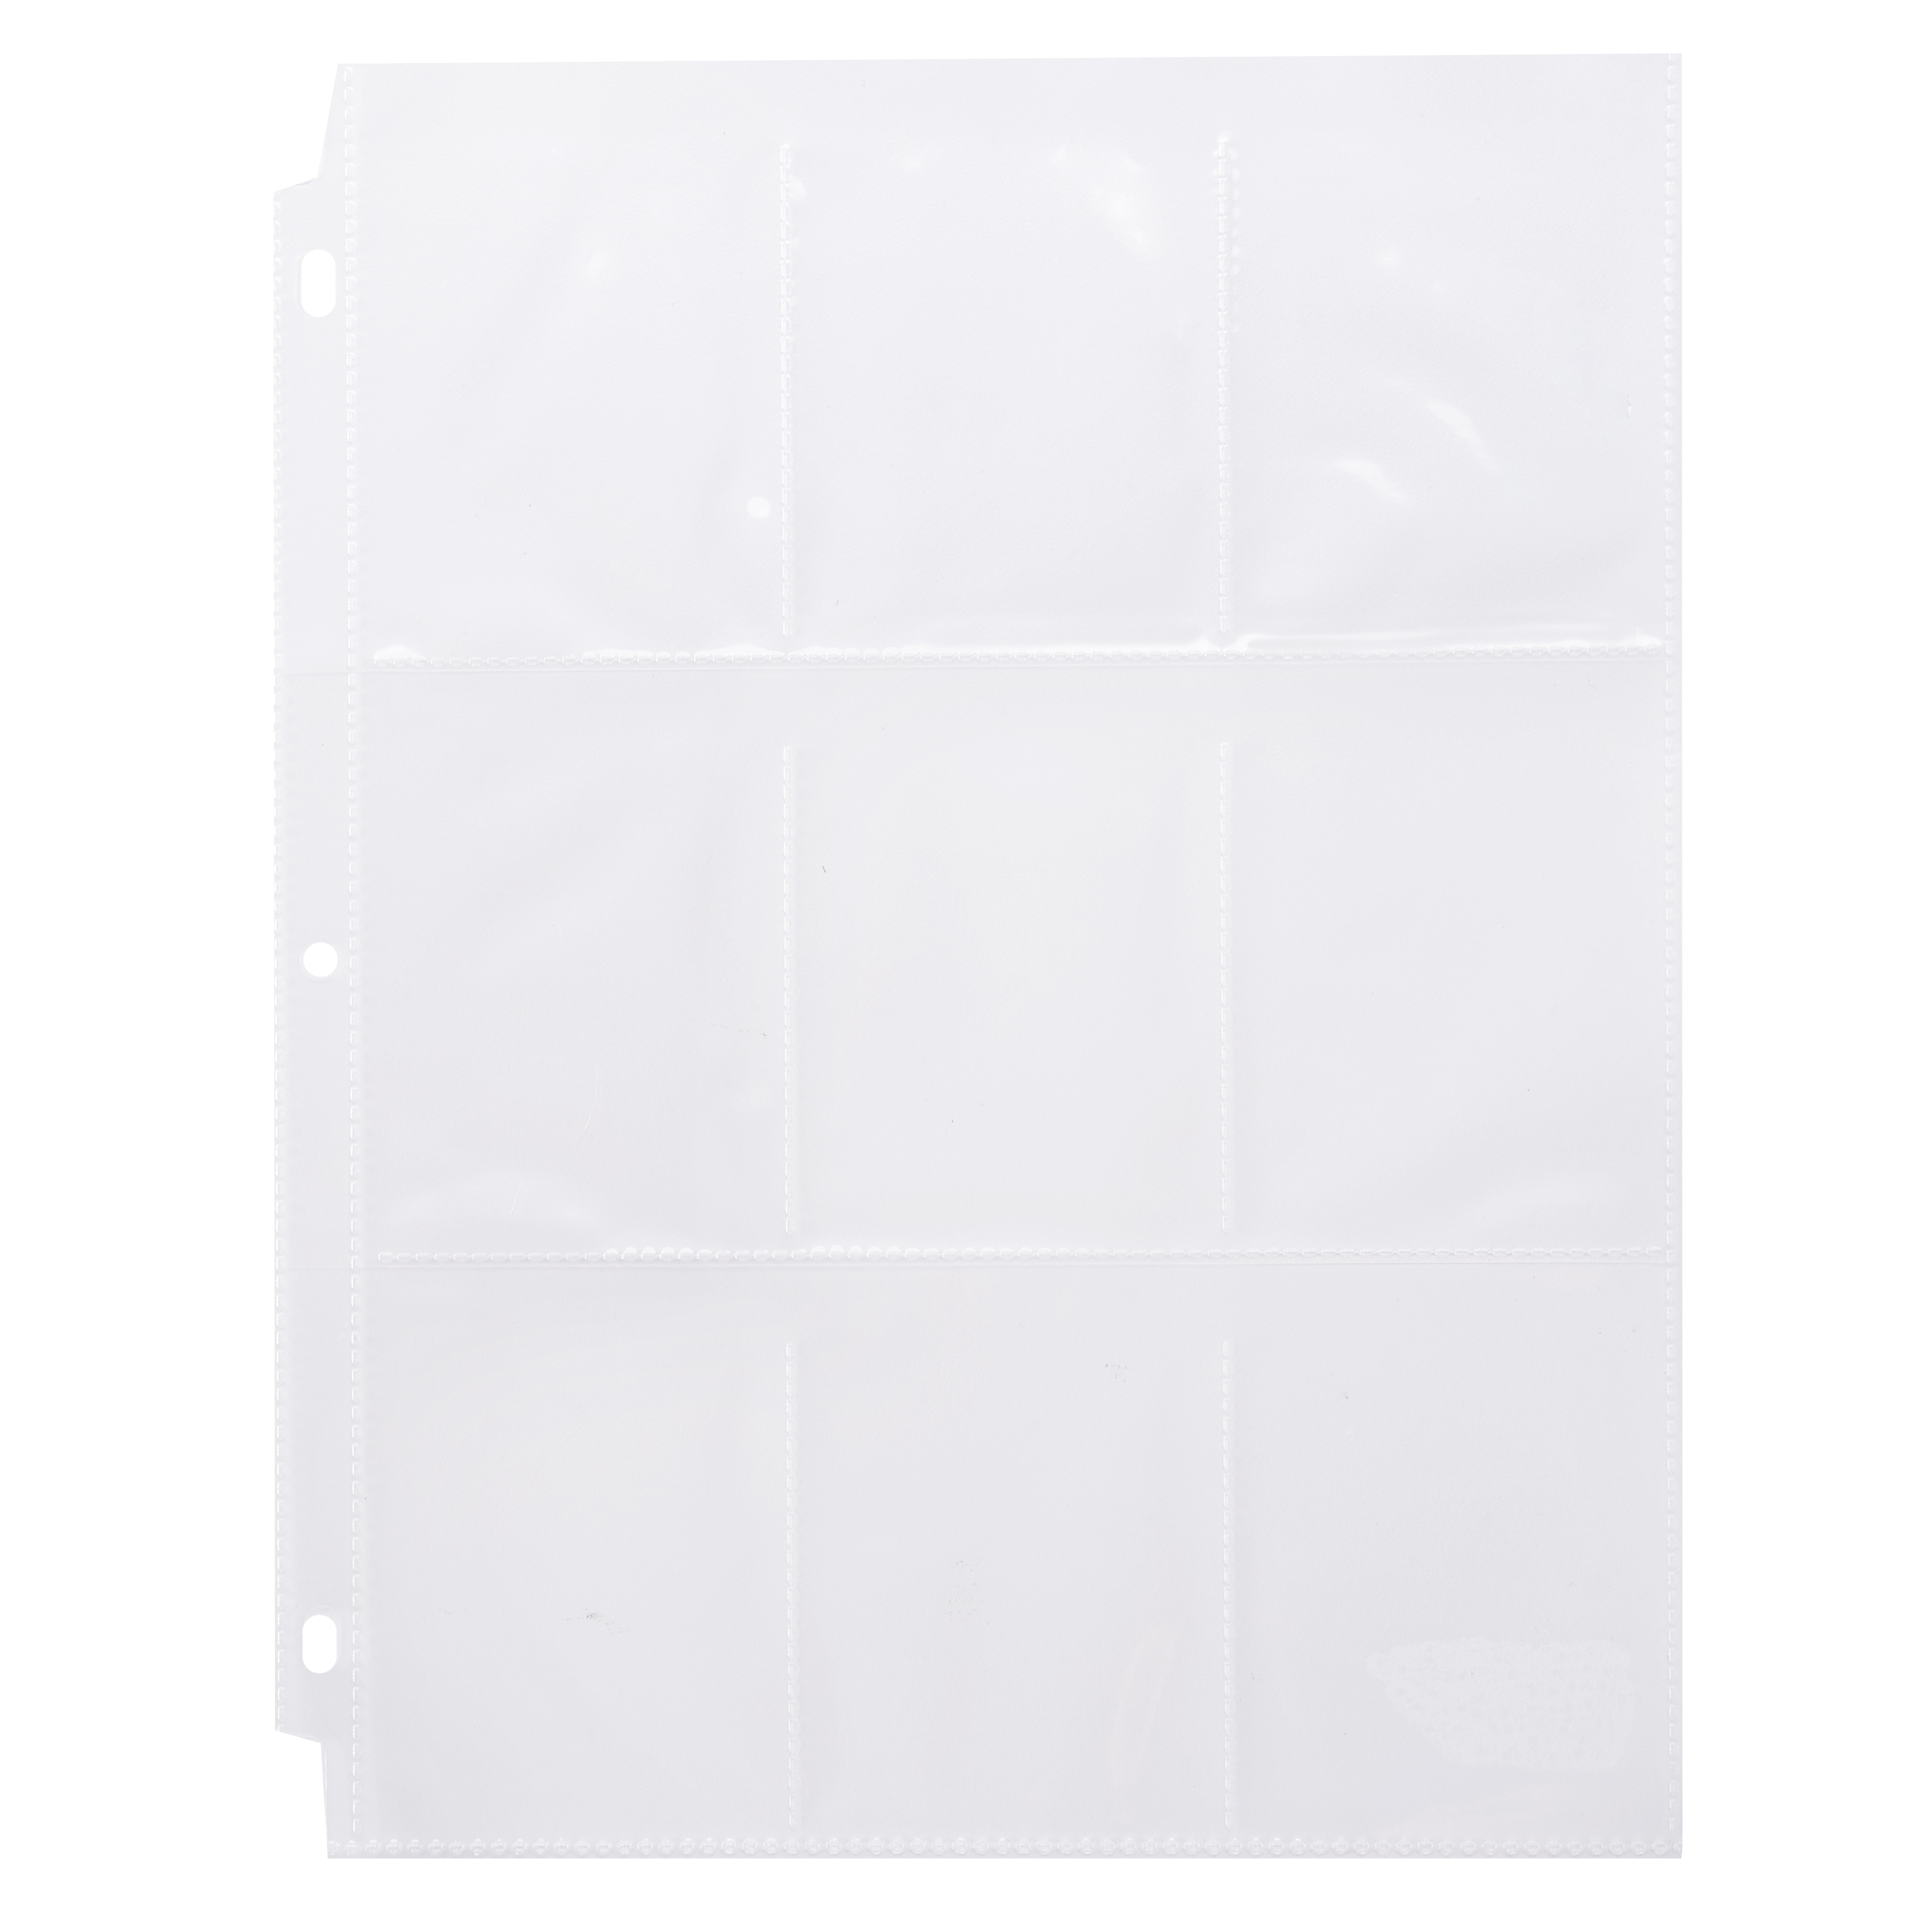 Pen + Gear 9-Pocket Protective Trading Card Pages, Sheet Protectors, Clear, 10 Count - image 2 of 5